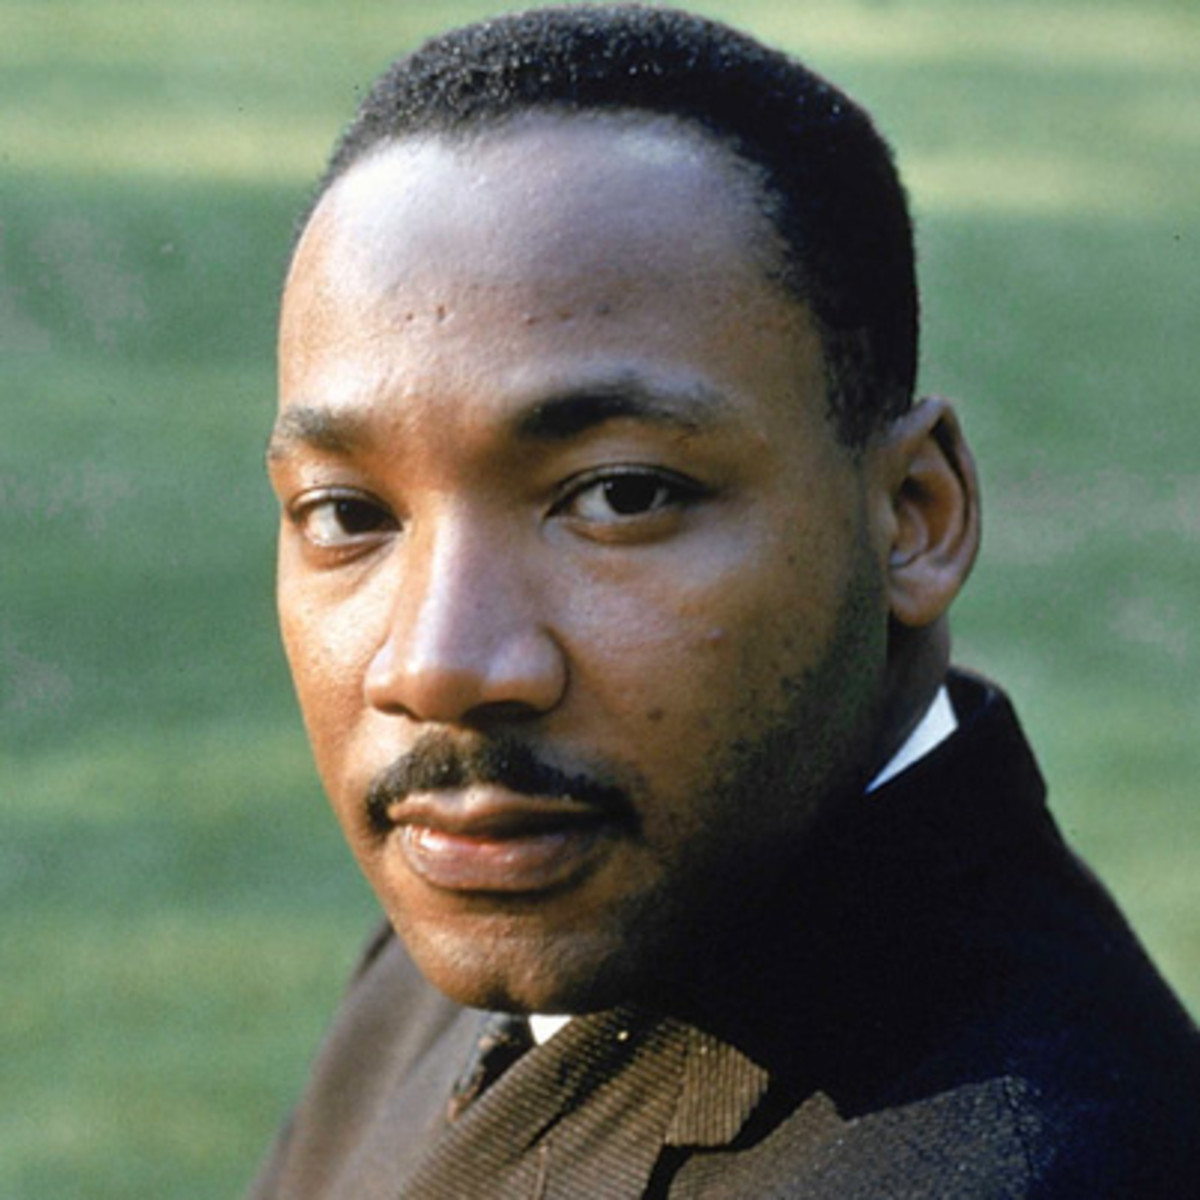 How tall is Martin Luther King Jr?